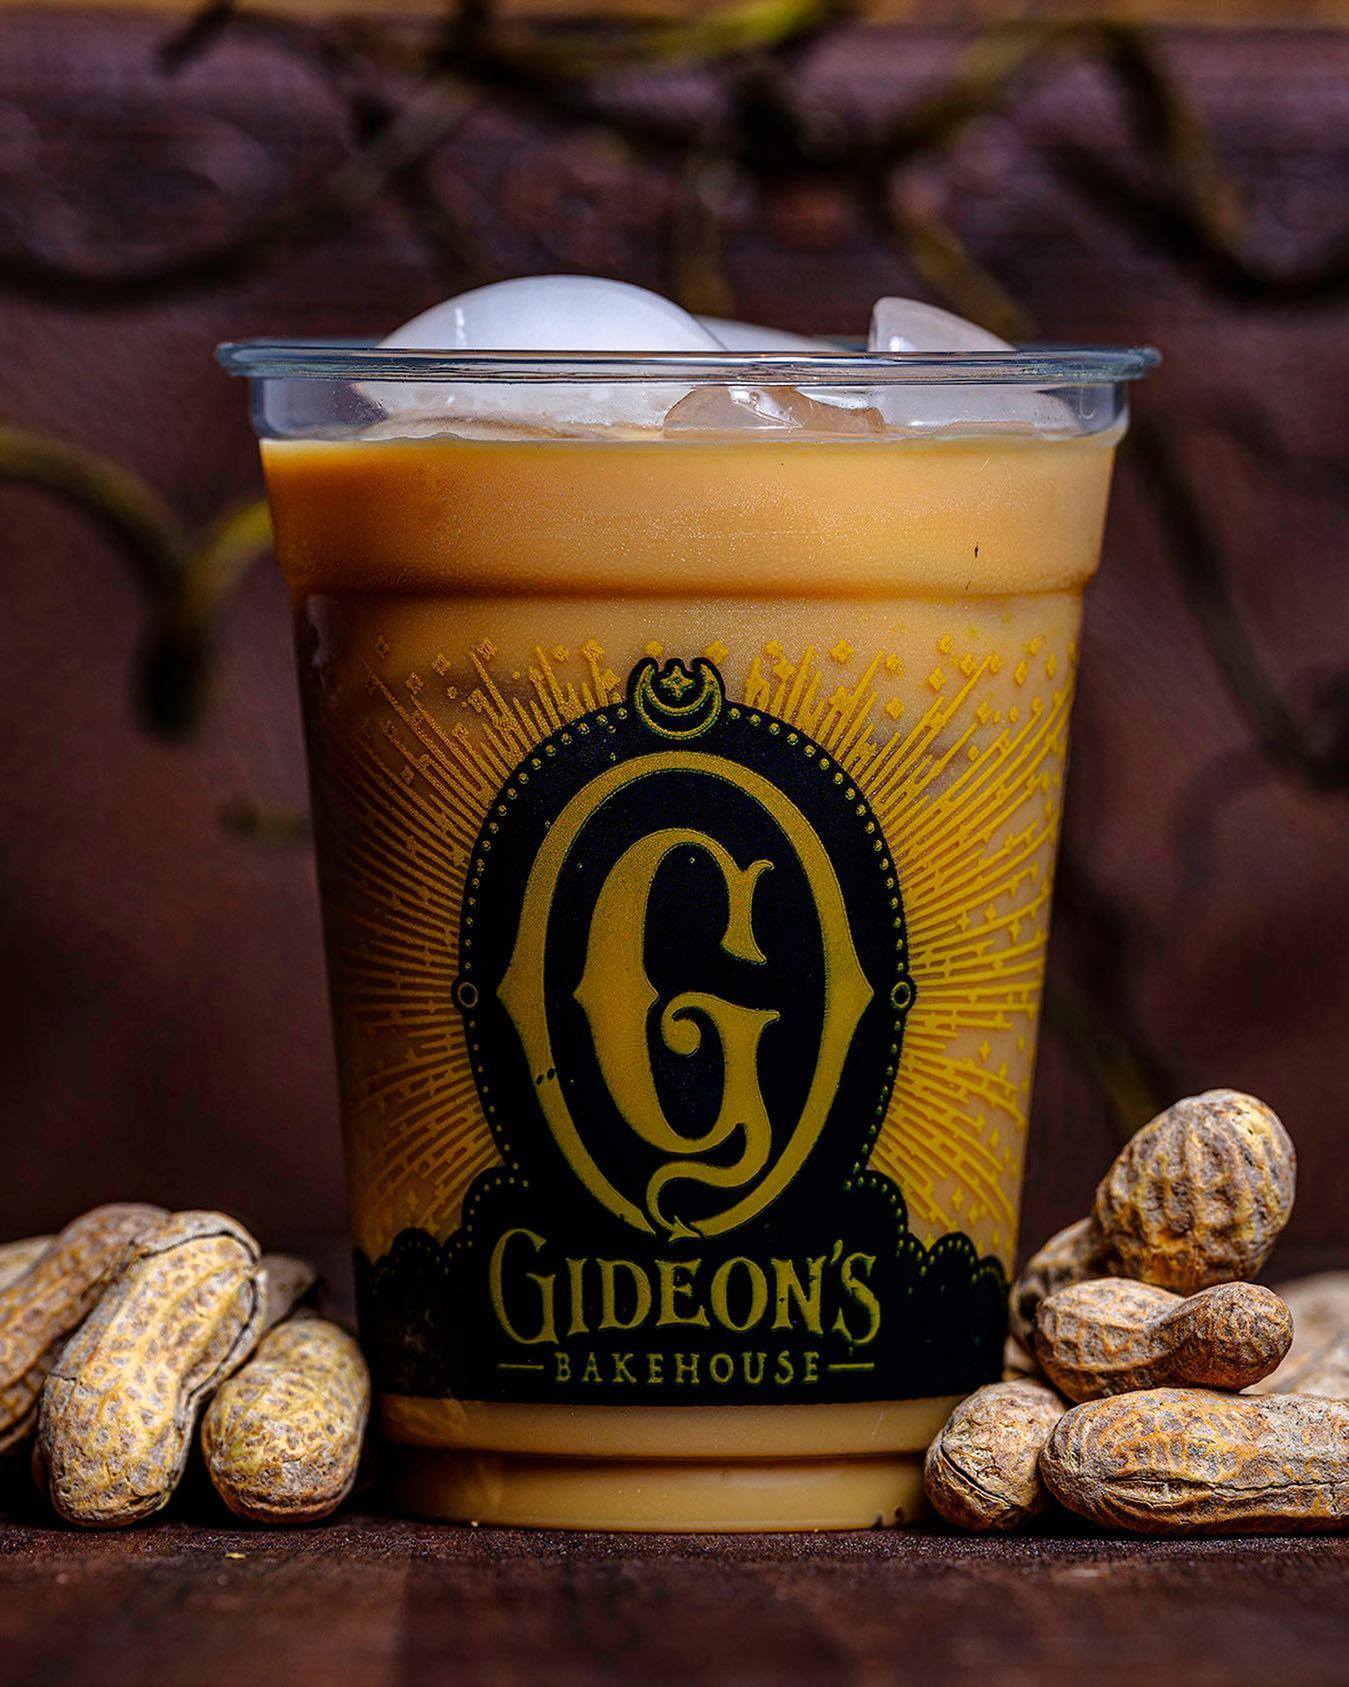 Gideon's Bakehouse is hiring at both locations in Orlando